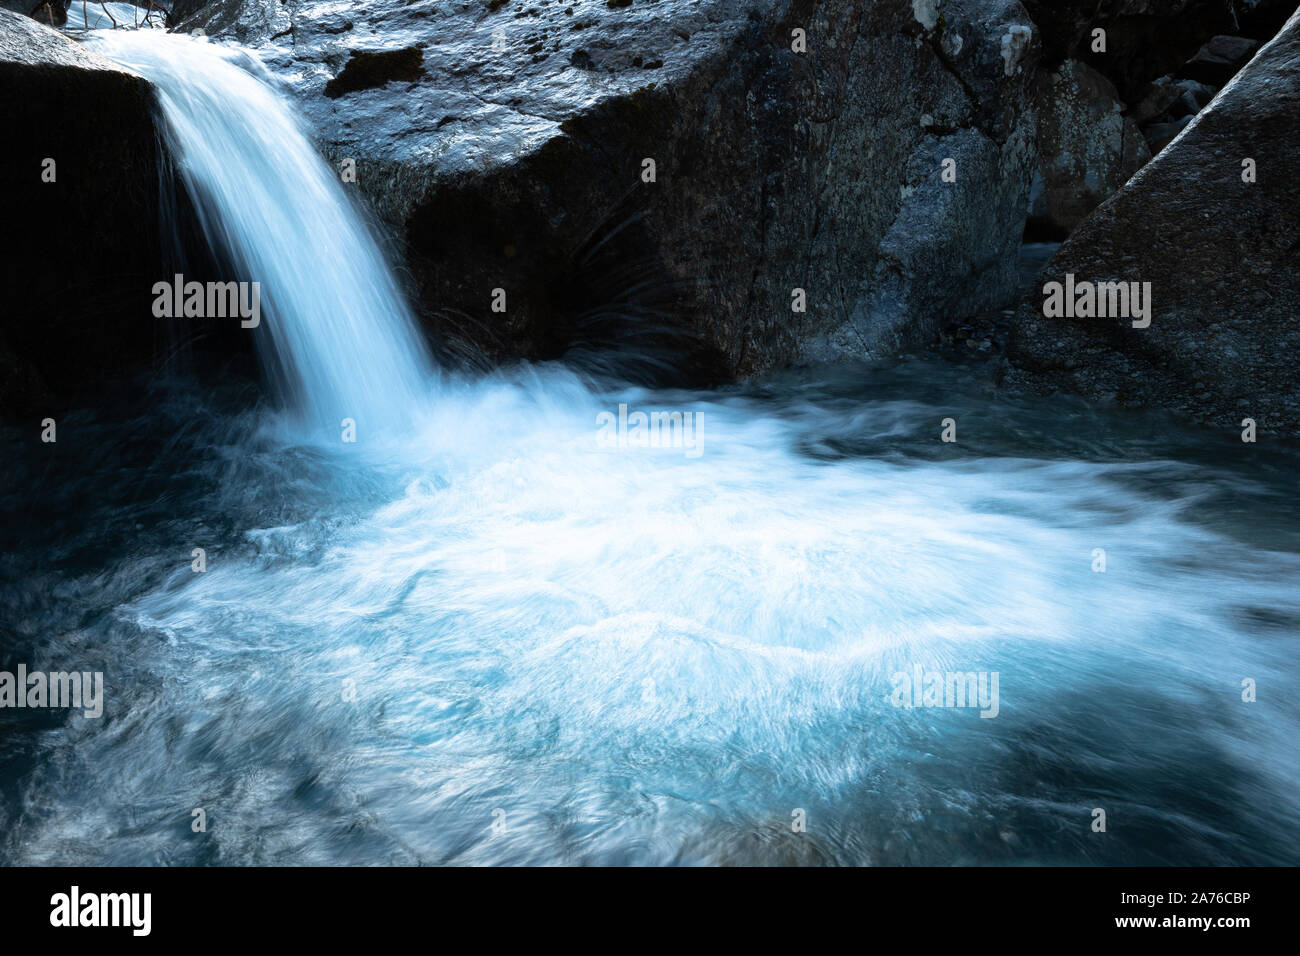 An Apine waterfall with blue water against dark rock Stock Photo